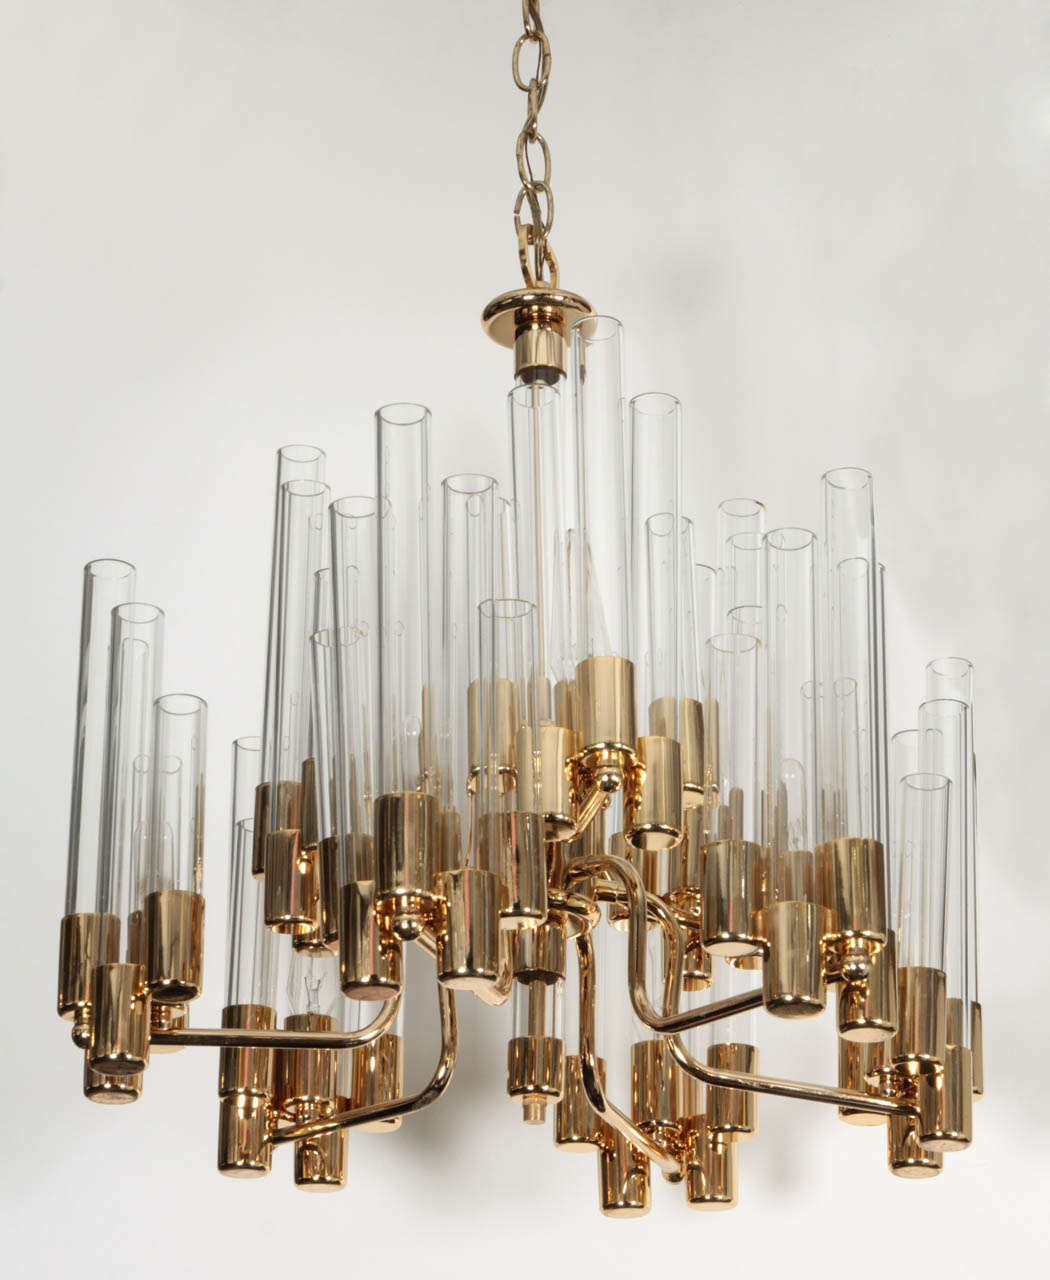 Fantastic Mid Century 2 tier brass and clear glass chandelier designed by Hans Agne Jakobsson. Bottom tier has 6 arms, top tier has 3.  Comes with 4ft of brass chain. Price reduced from 4800.